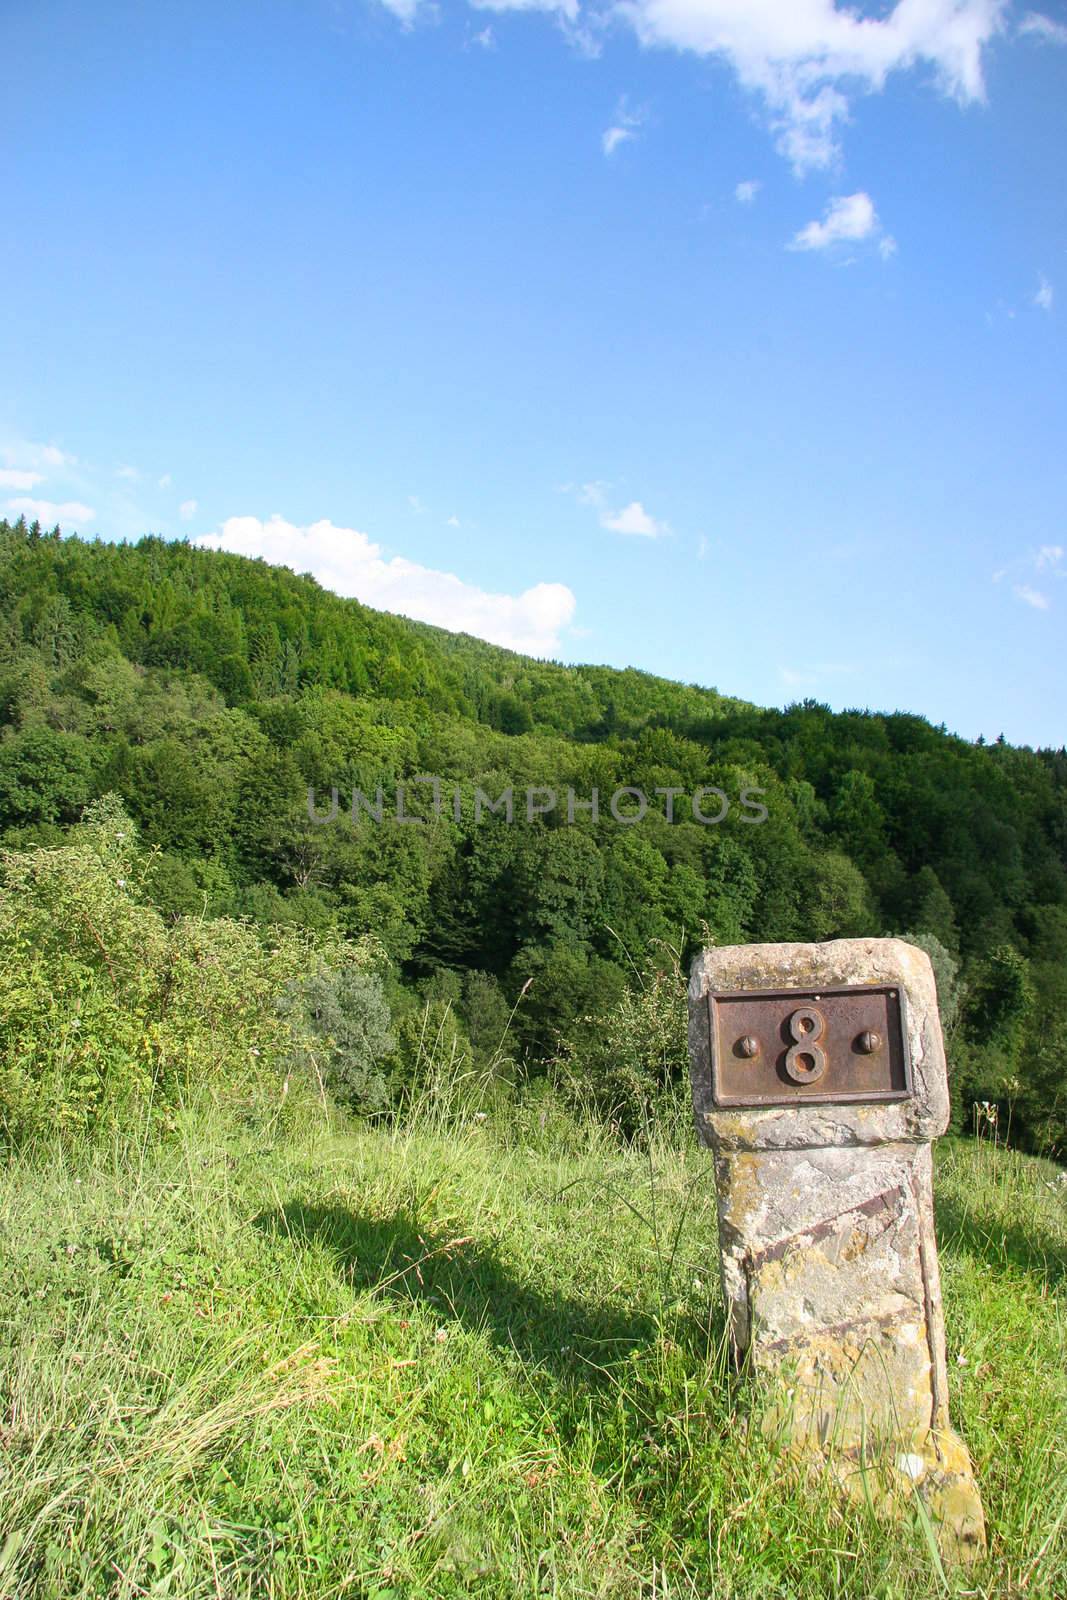 milestone marked with eight and positioneda on a hill